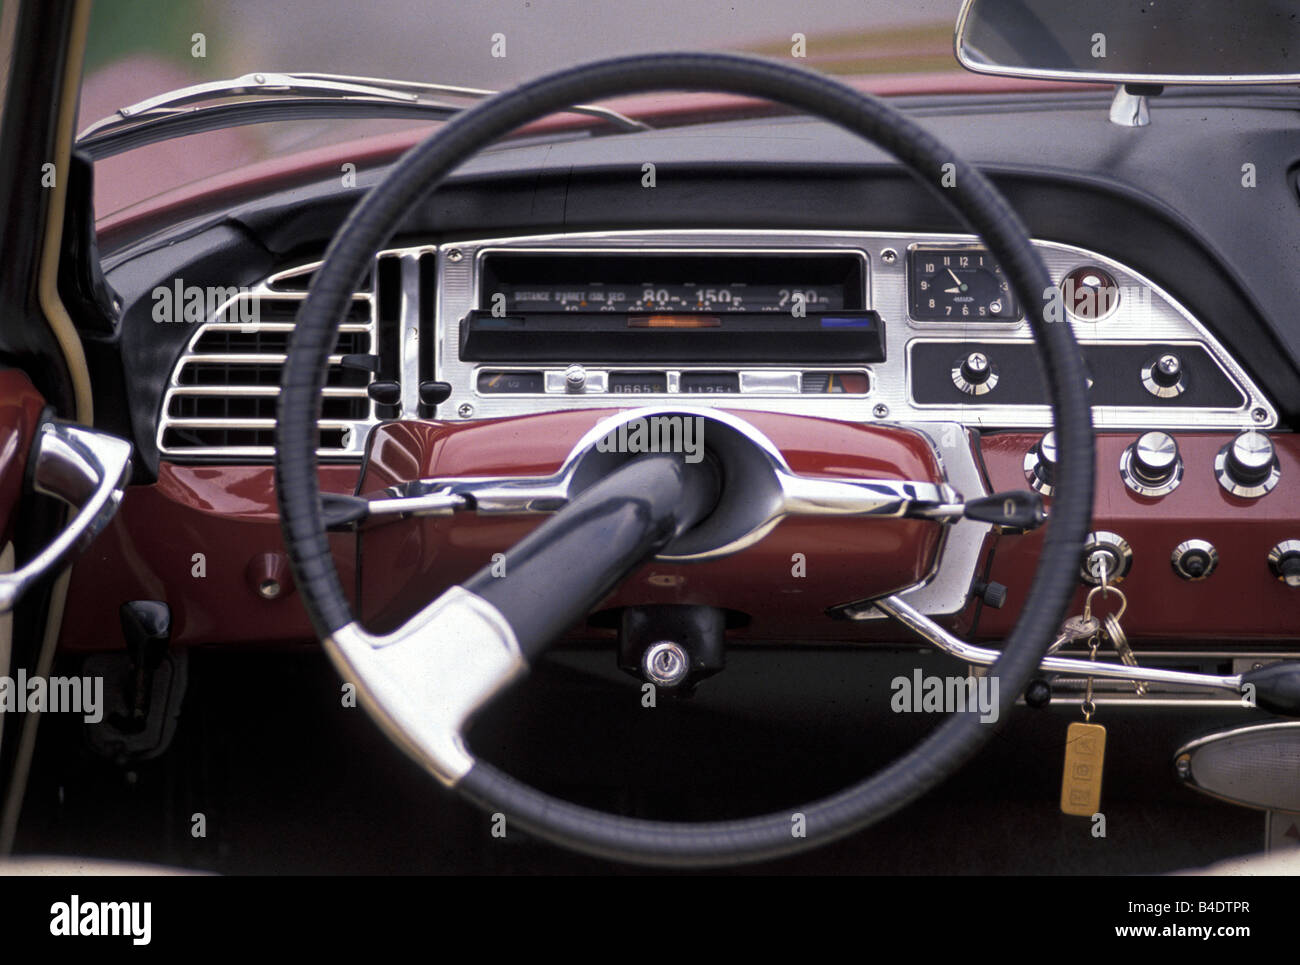 Car, Citroen DS Convertible, model year 1961-1965, Vintage approx.,  sixties, red, Interior view, Cockpit, technique/accessory, a Stock Photo -  Alamy